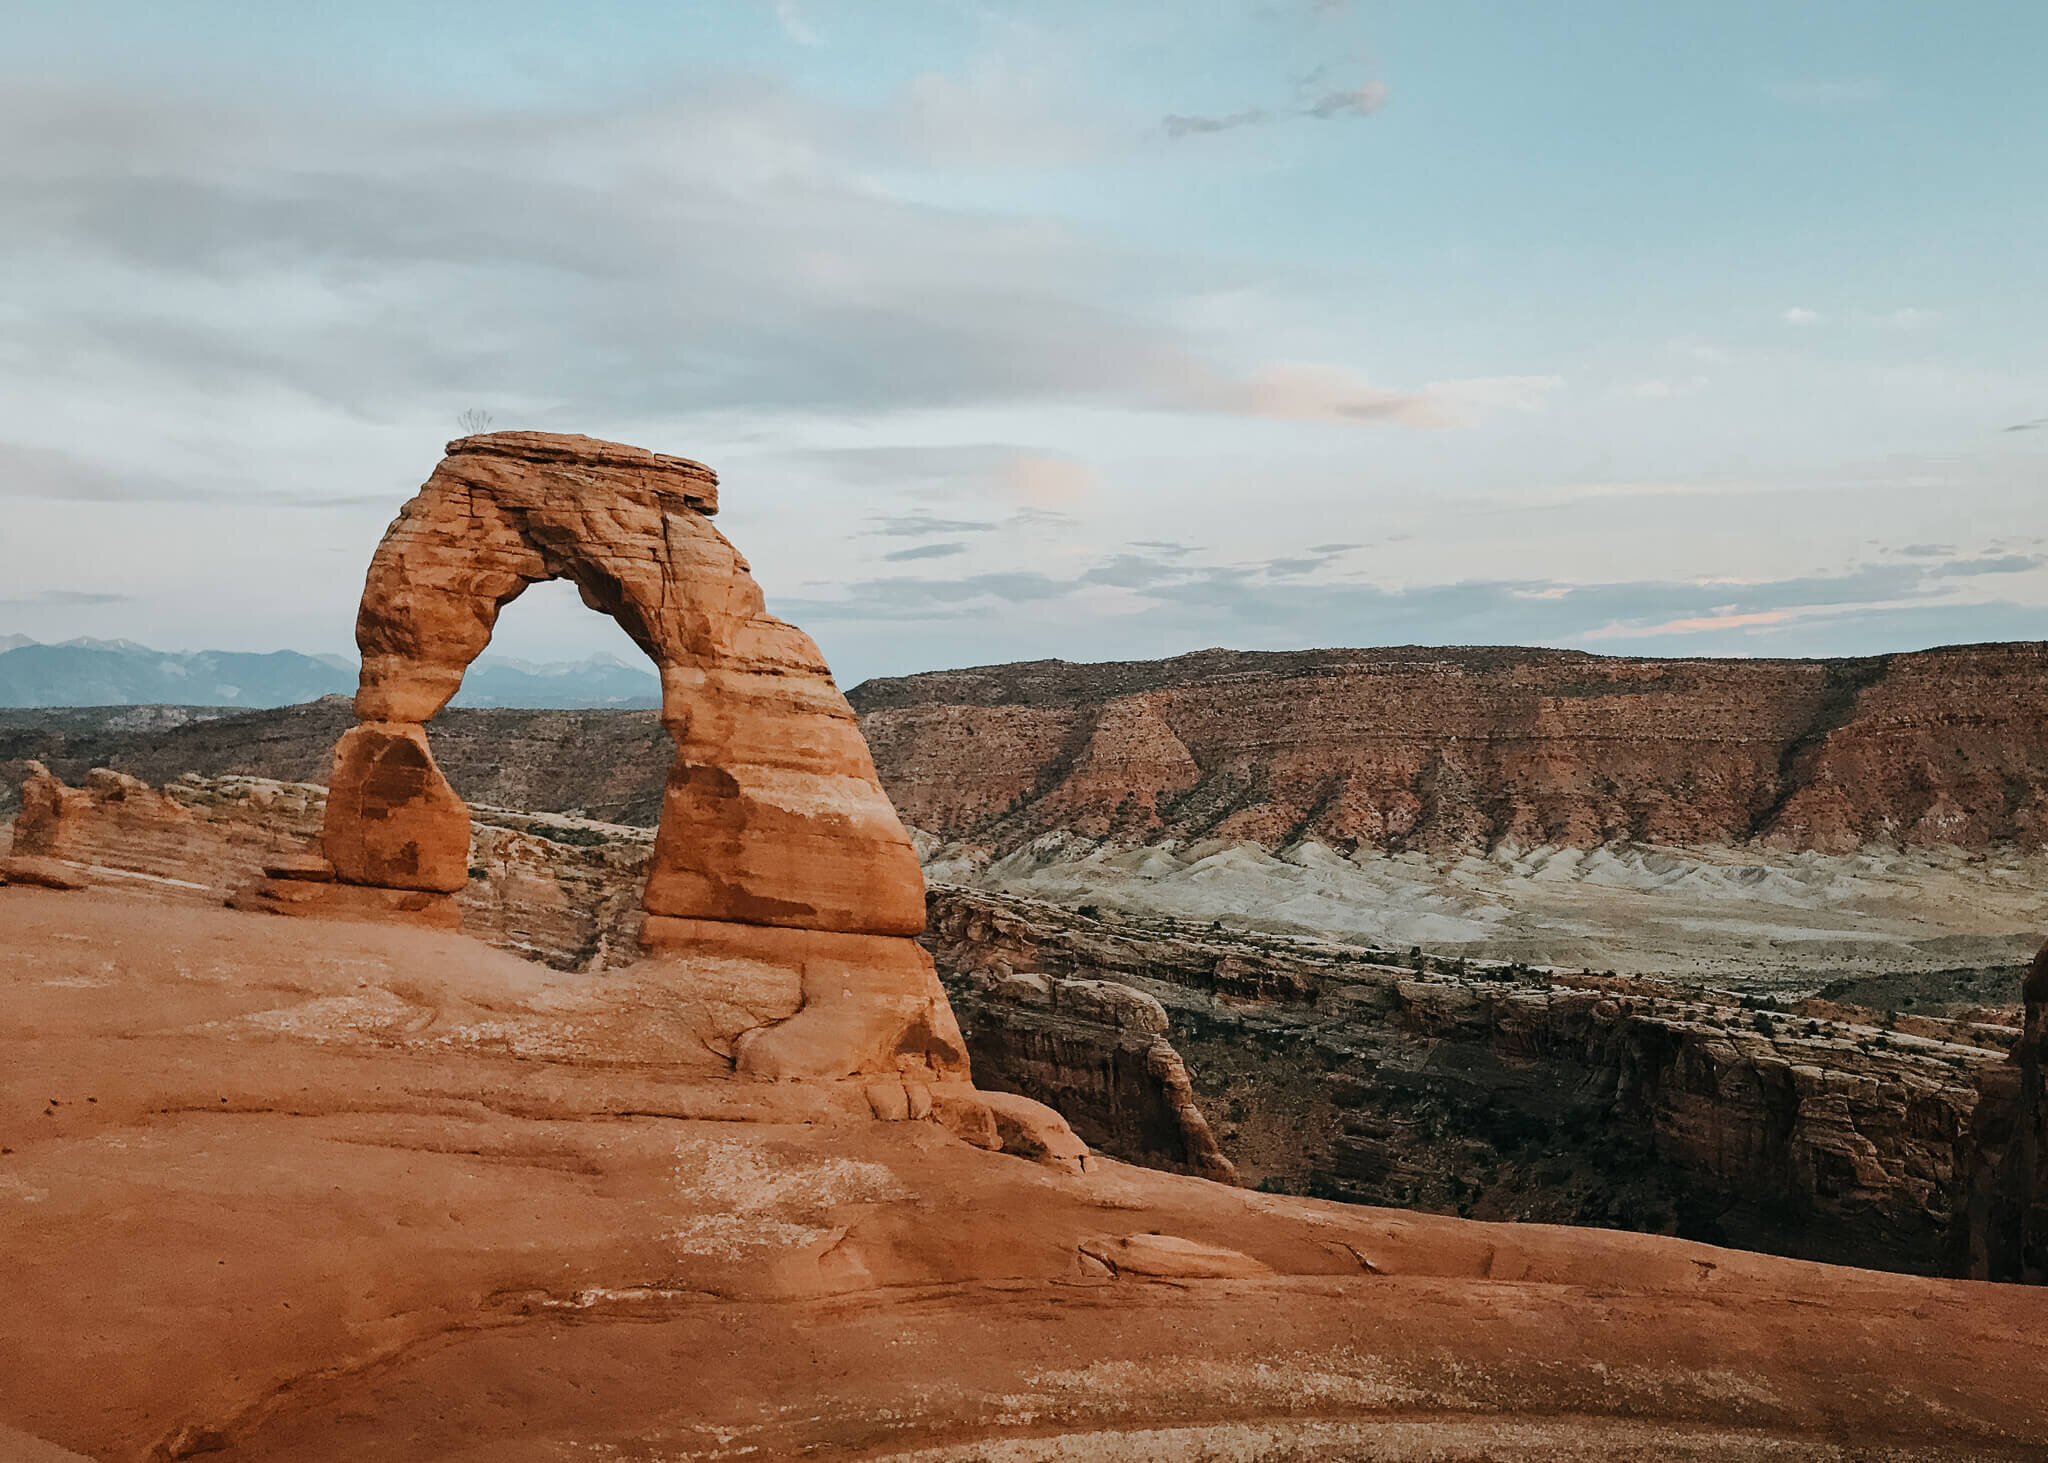 Arches National Park Travel Guide